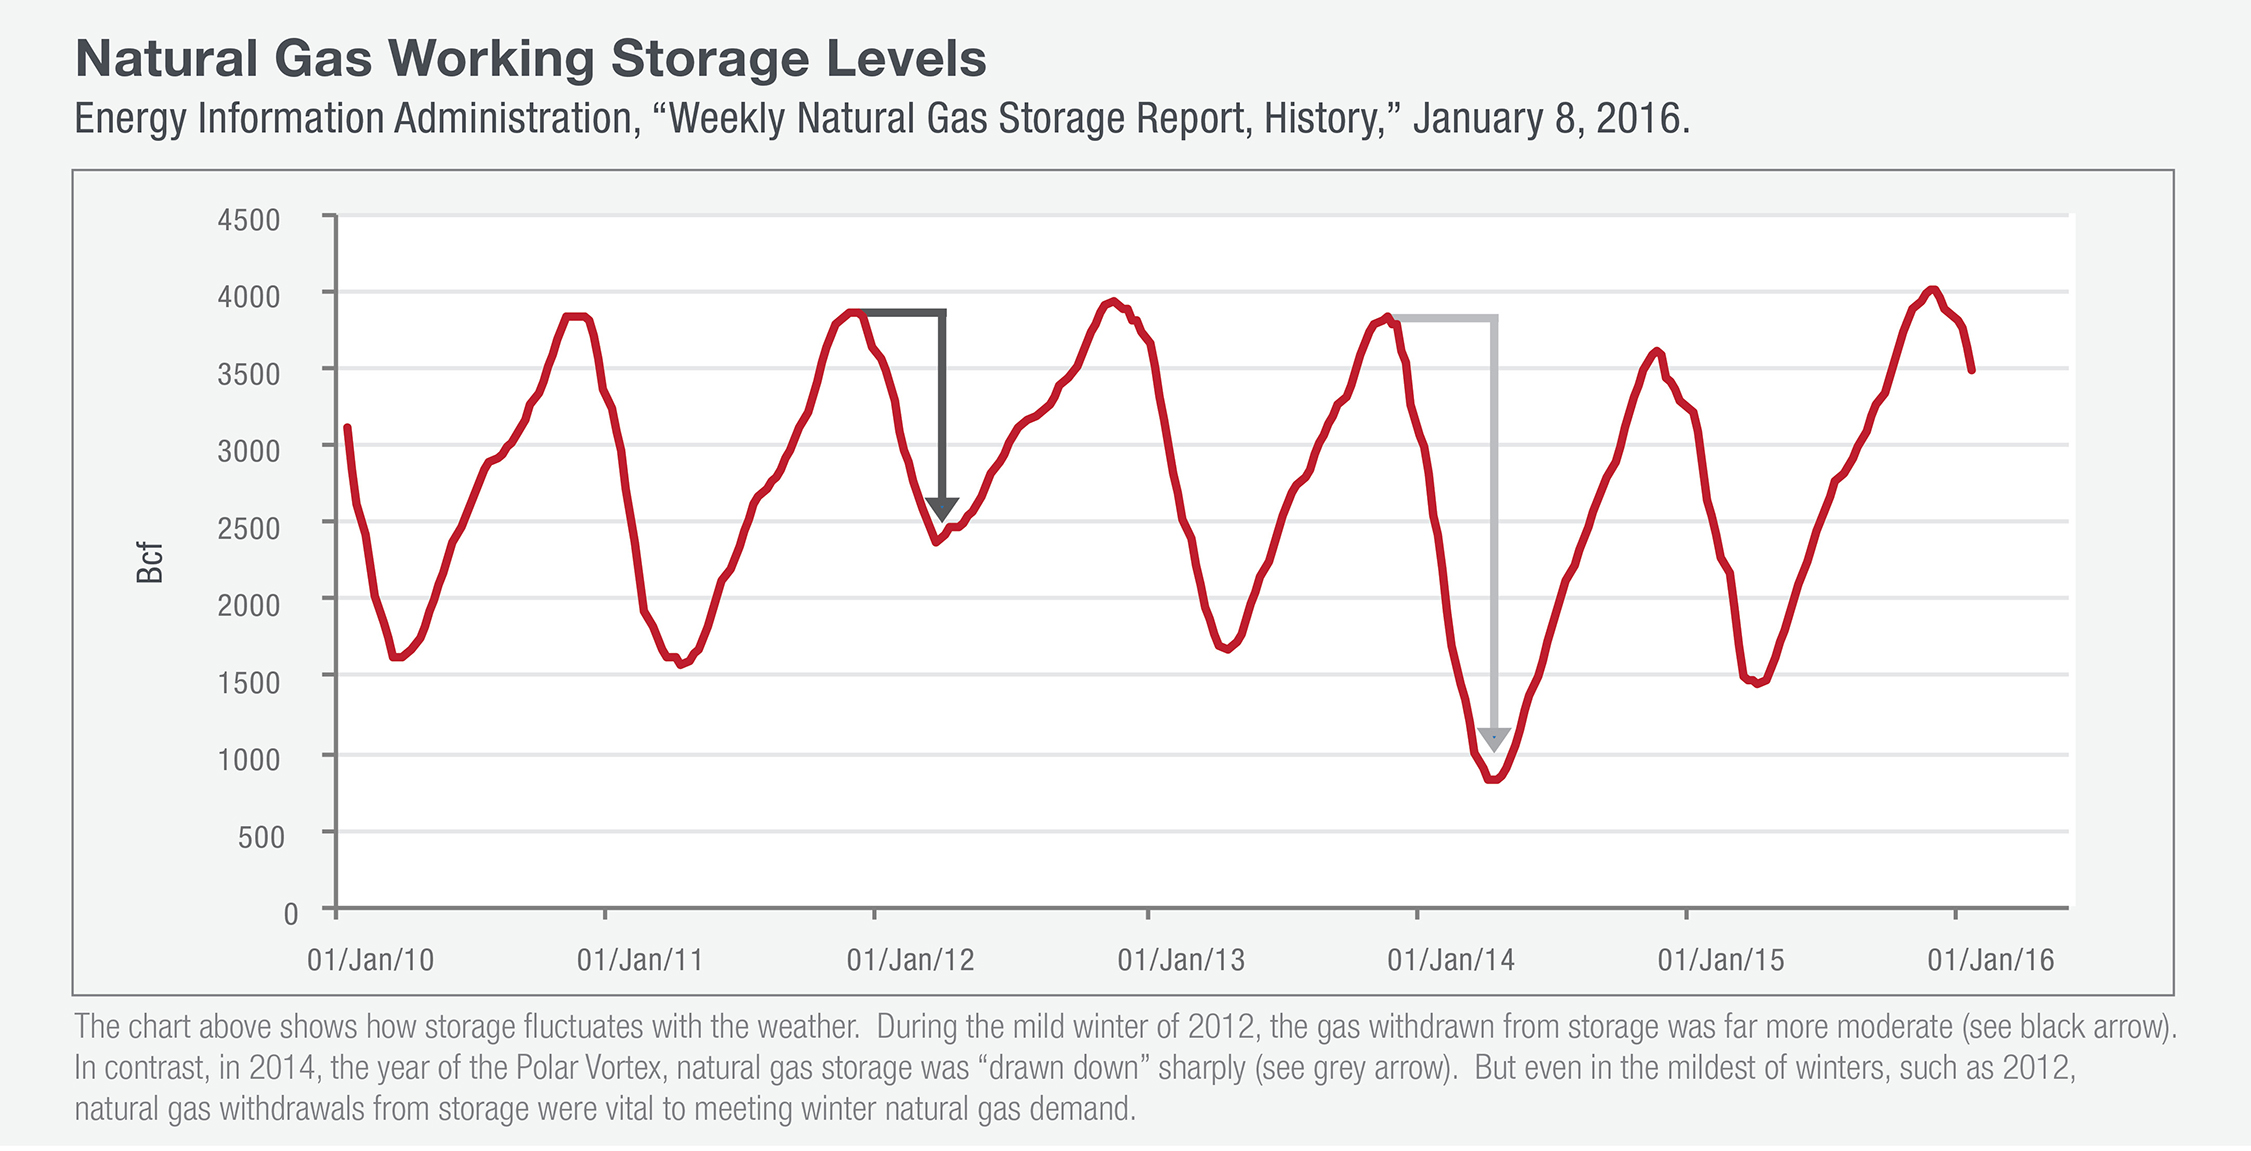 This graph shows natural gas working storage levels